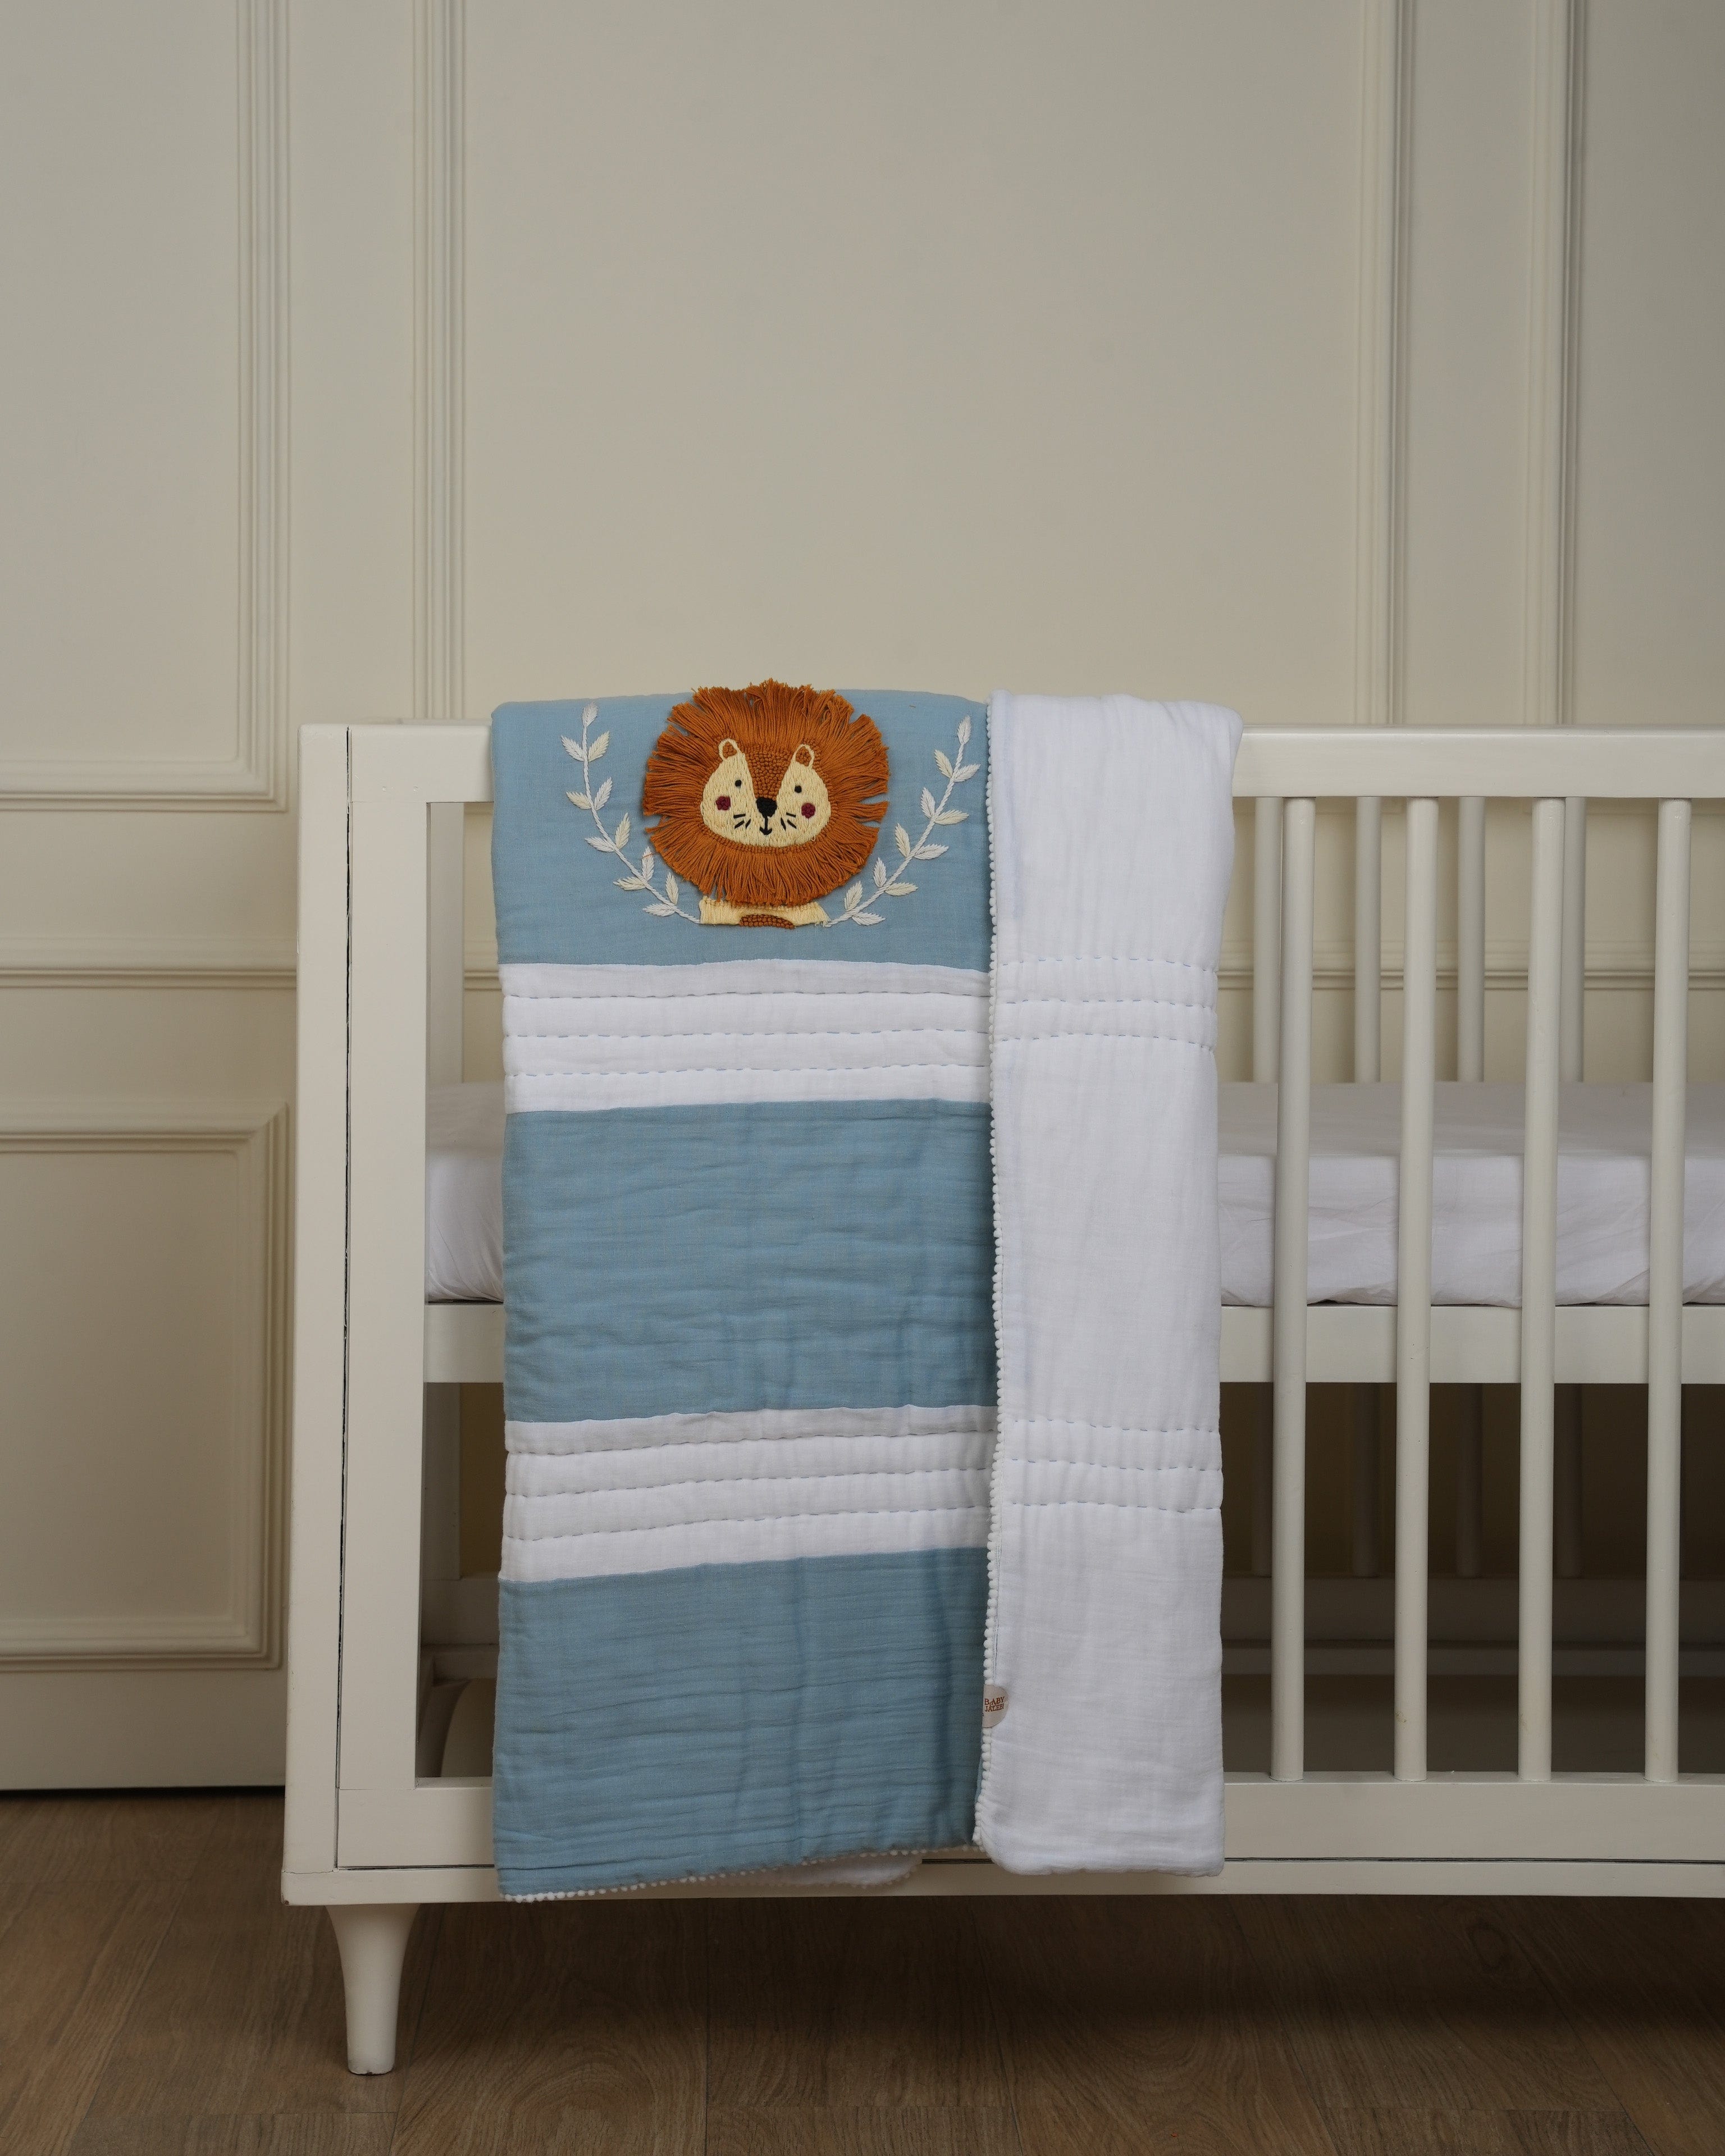 Lion King Complete Cot Bedding Set with Bumper